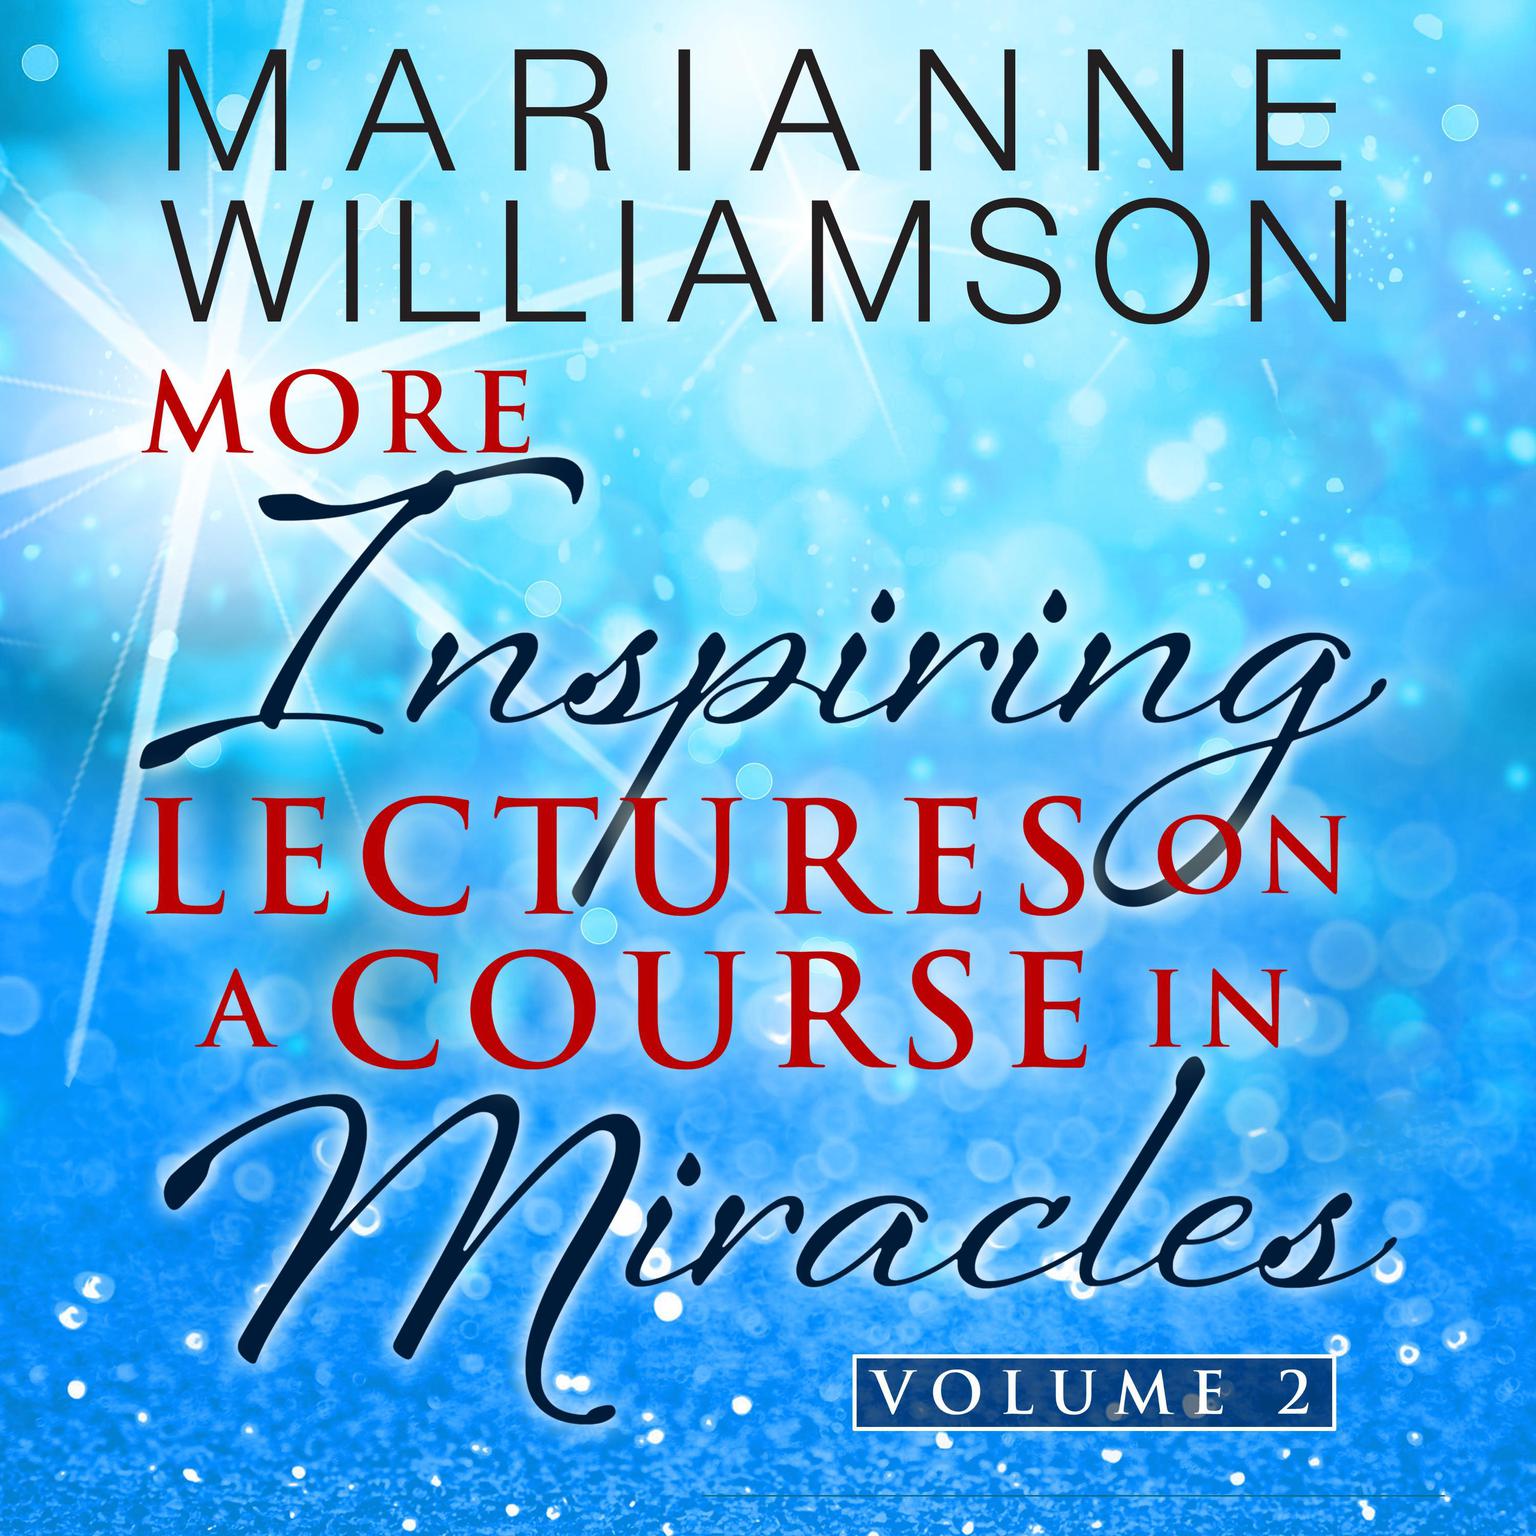 Marianne Williamson: More Inspiring Lectures on a Course in Miracles Volume 2 Audiobook, by Marianne Williamson